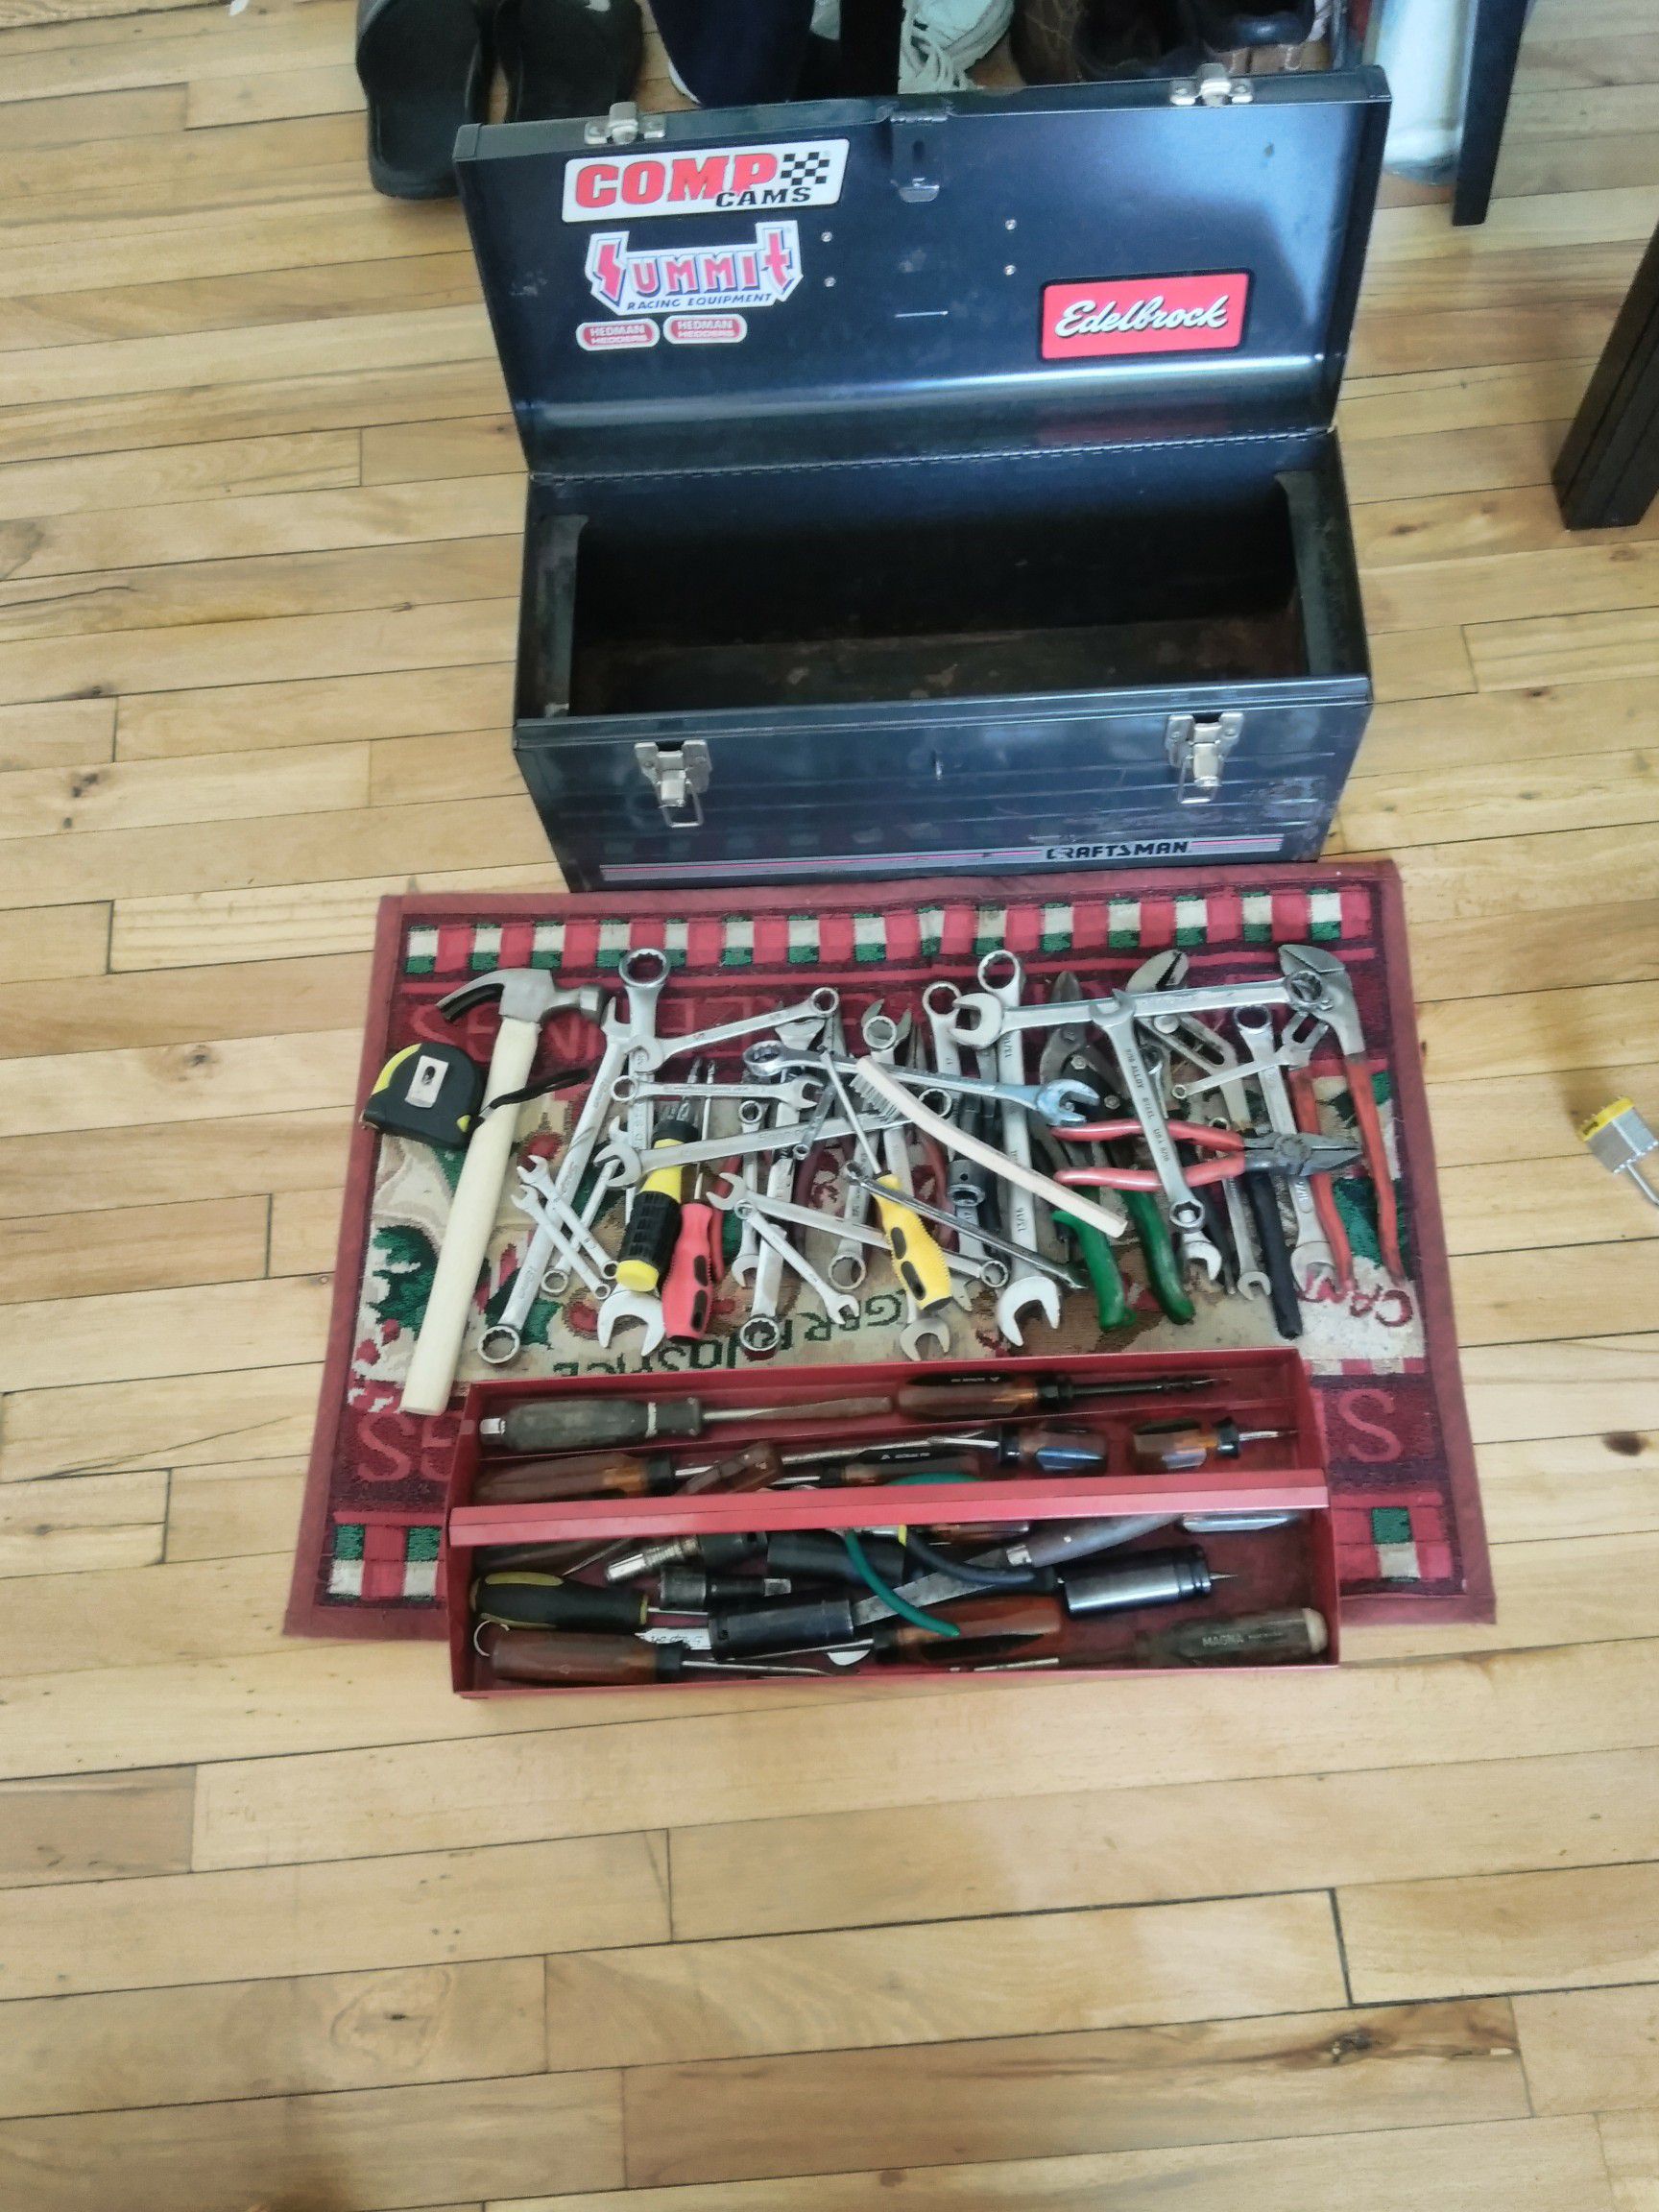 Used hand Tools, a tape measure, 4 impact sockets , 2 pieces 3" extension, 10 pliers, 24 wrenches, I small hammer. All in a handy box.